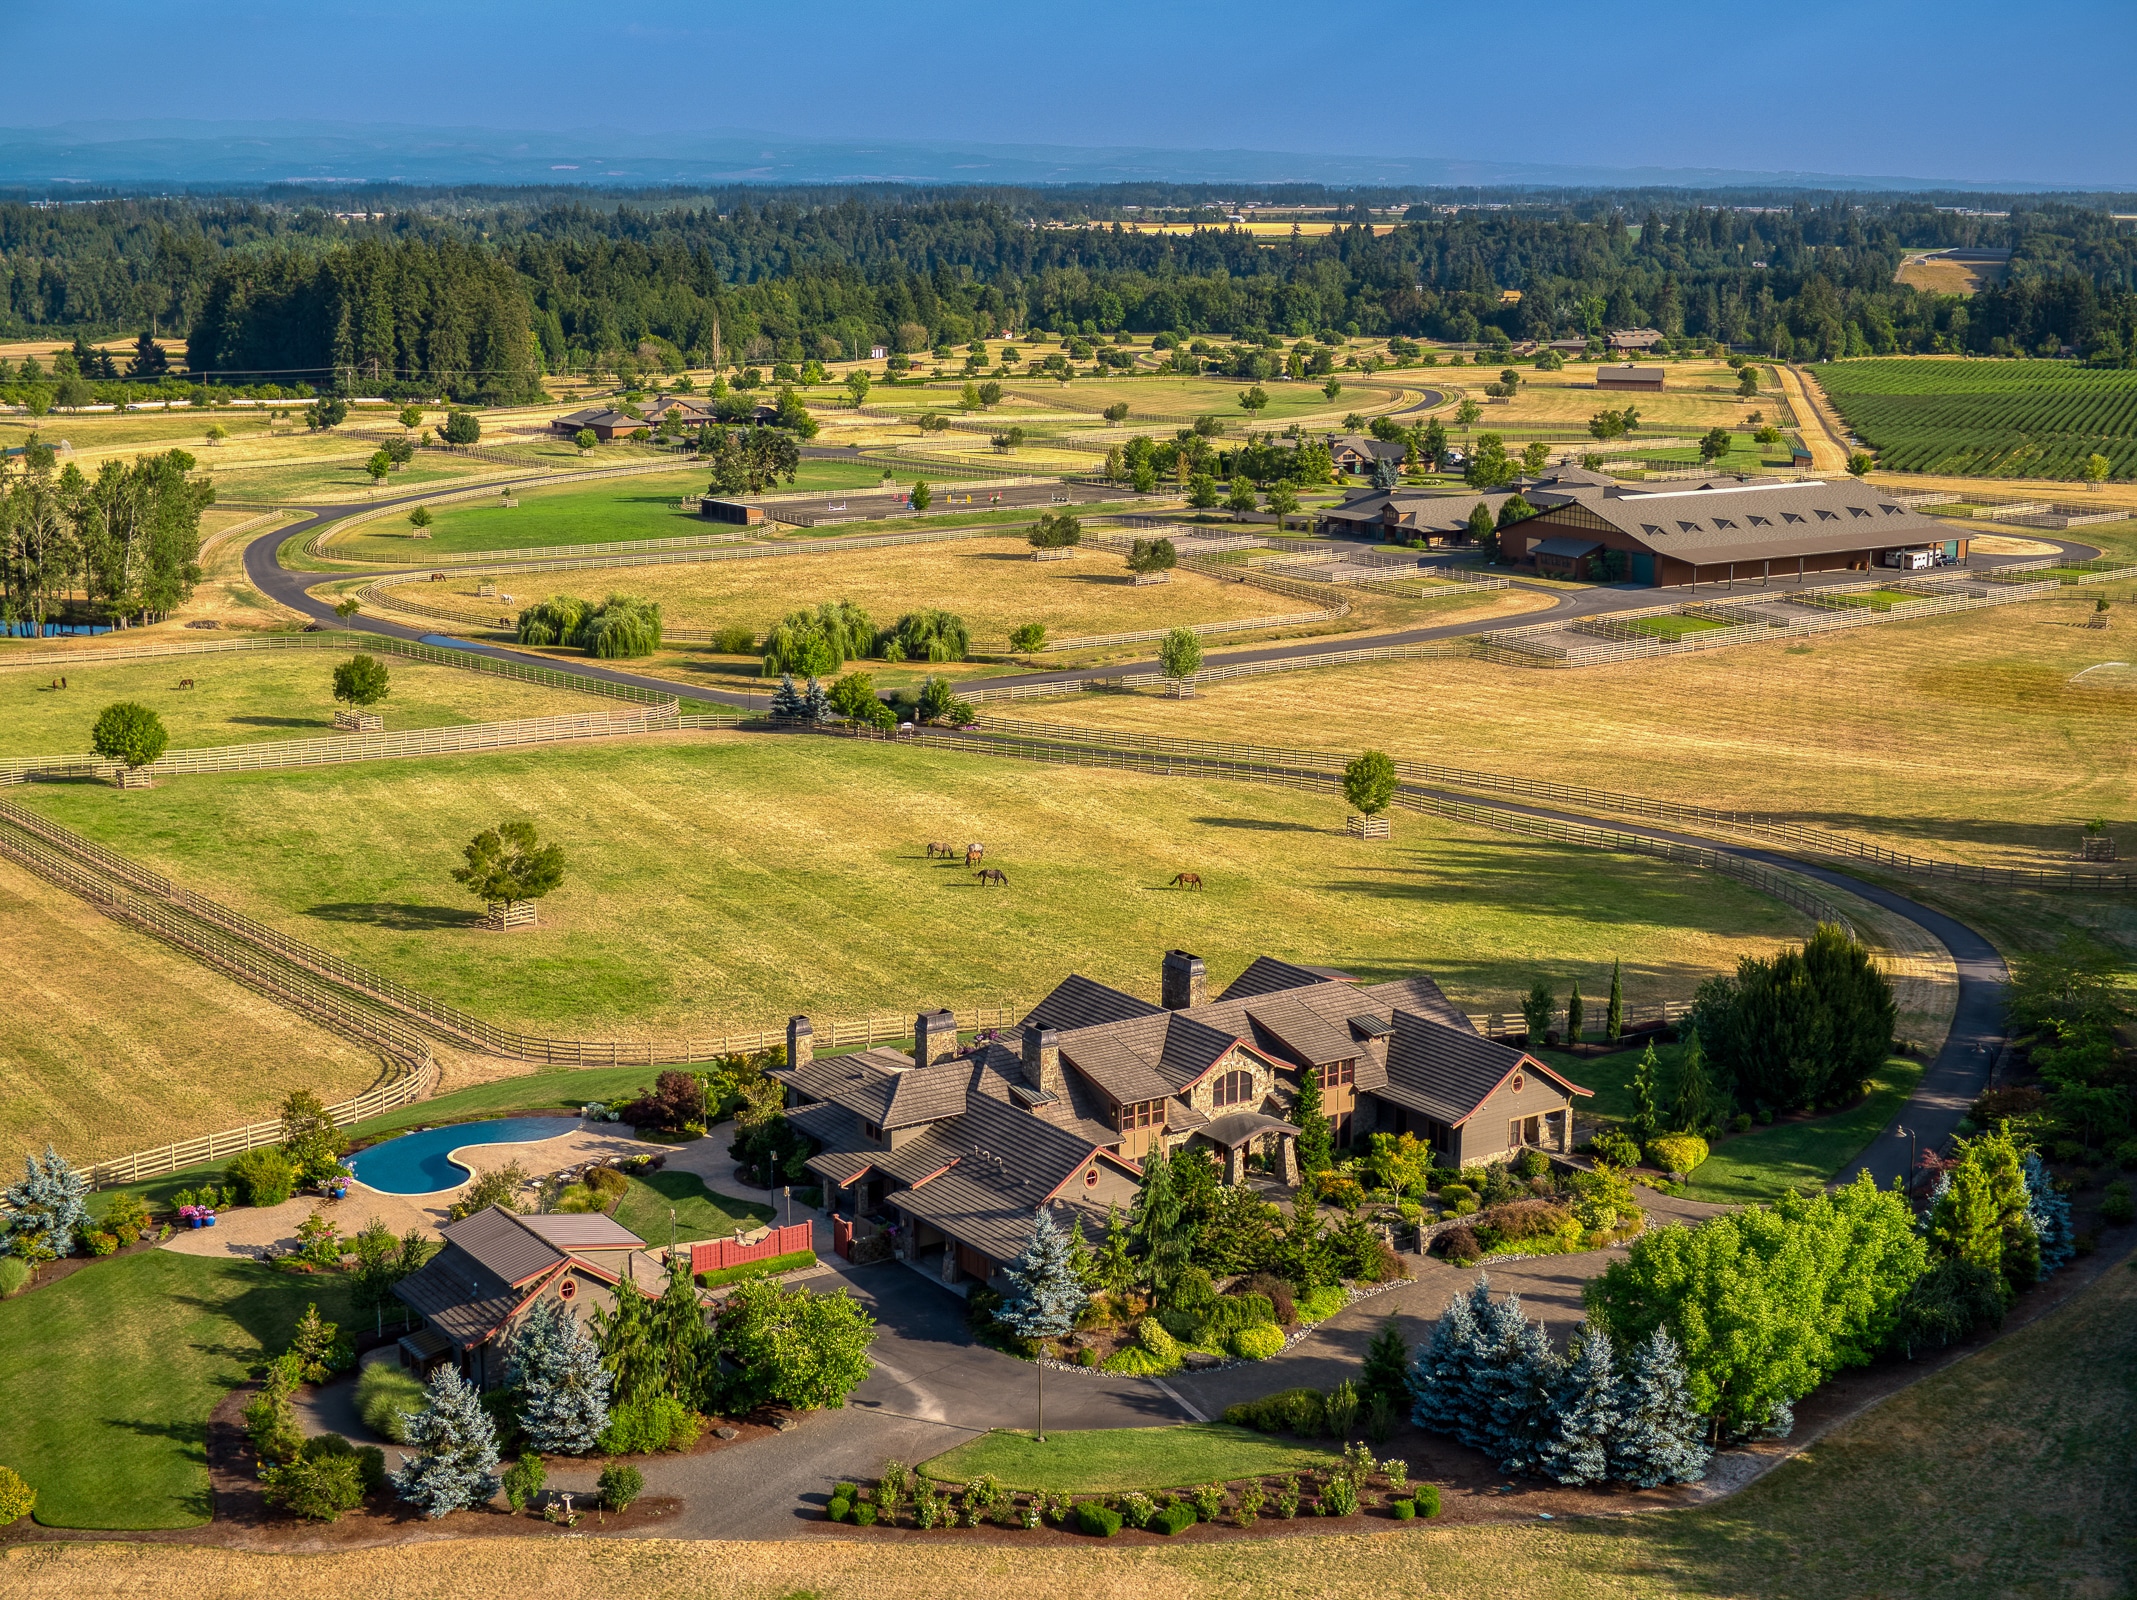 A Fully Fitted-Out Equestrian Estate In Oregon Asks $19.5 Million